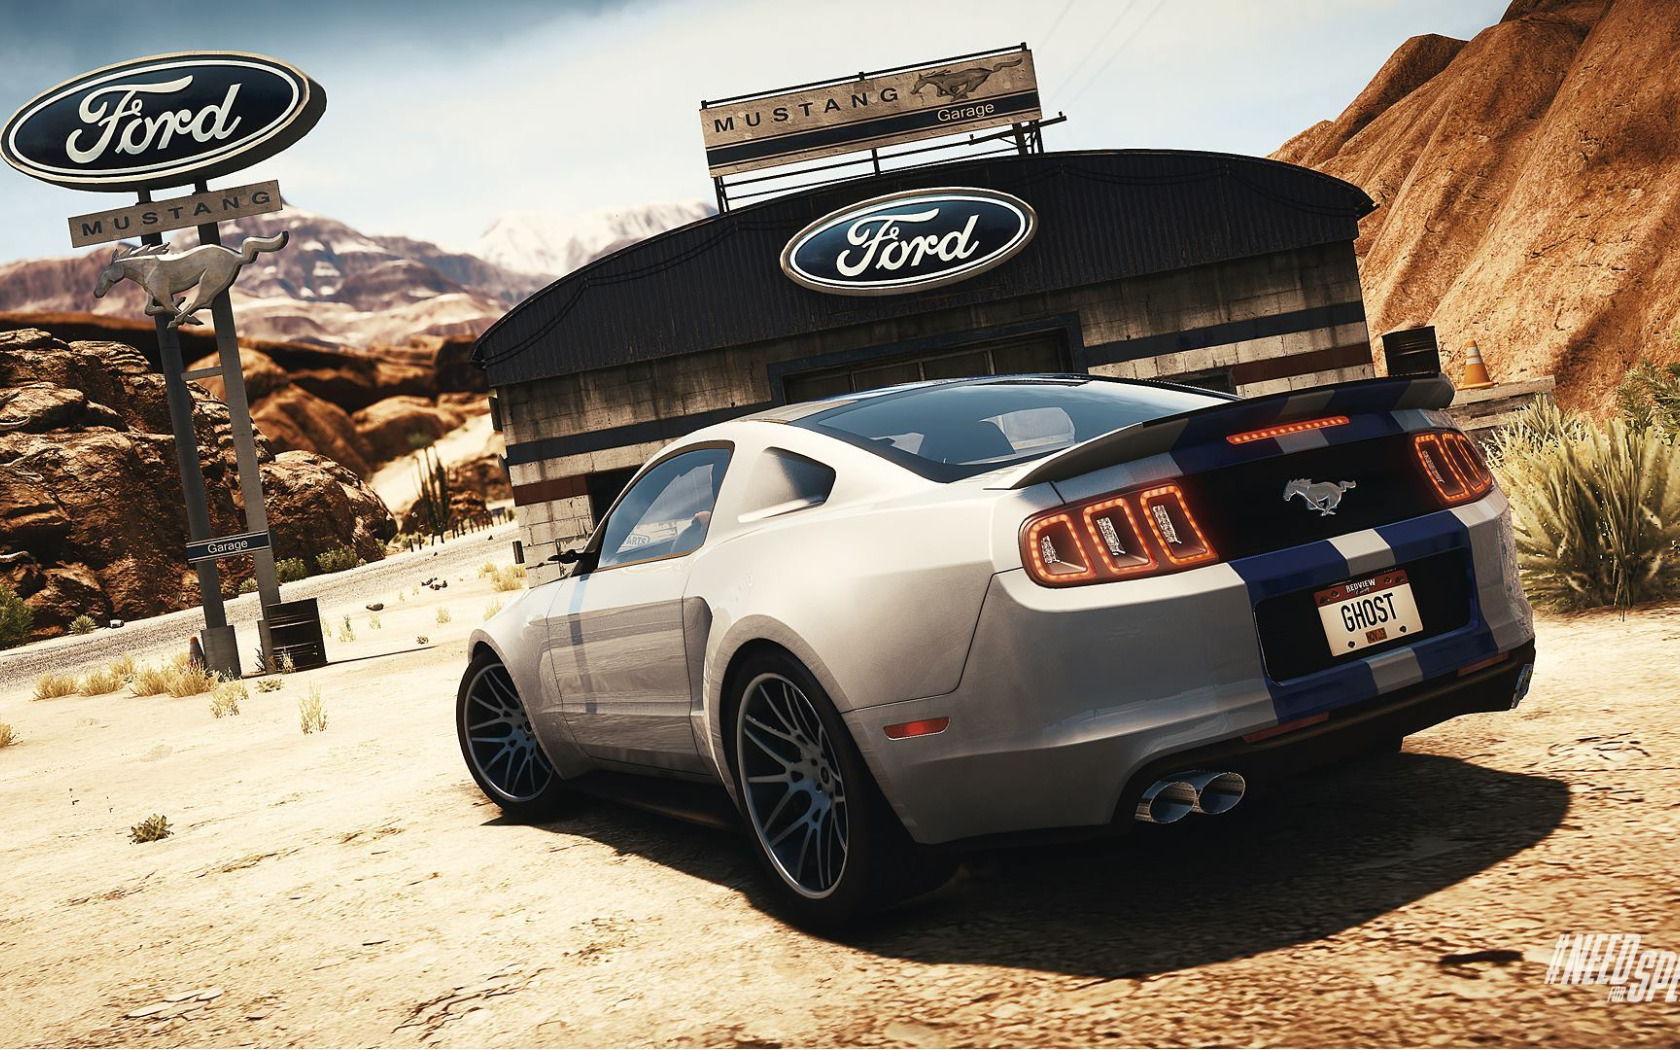 Need for speed мустанг. Ford Mustang gt 500 NFS Rivals. Ford Mustang gt 2014 NFS Rivals. NFS 2015 Ford Mustang gt. Ford Mustang gt NFS Rivals.